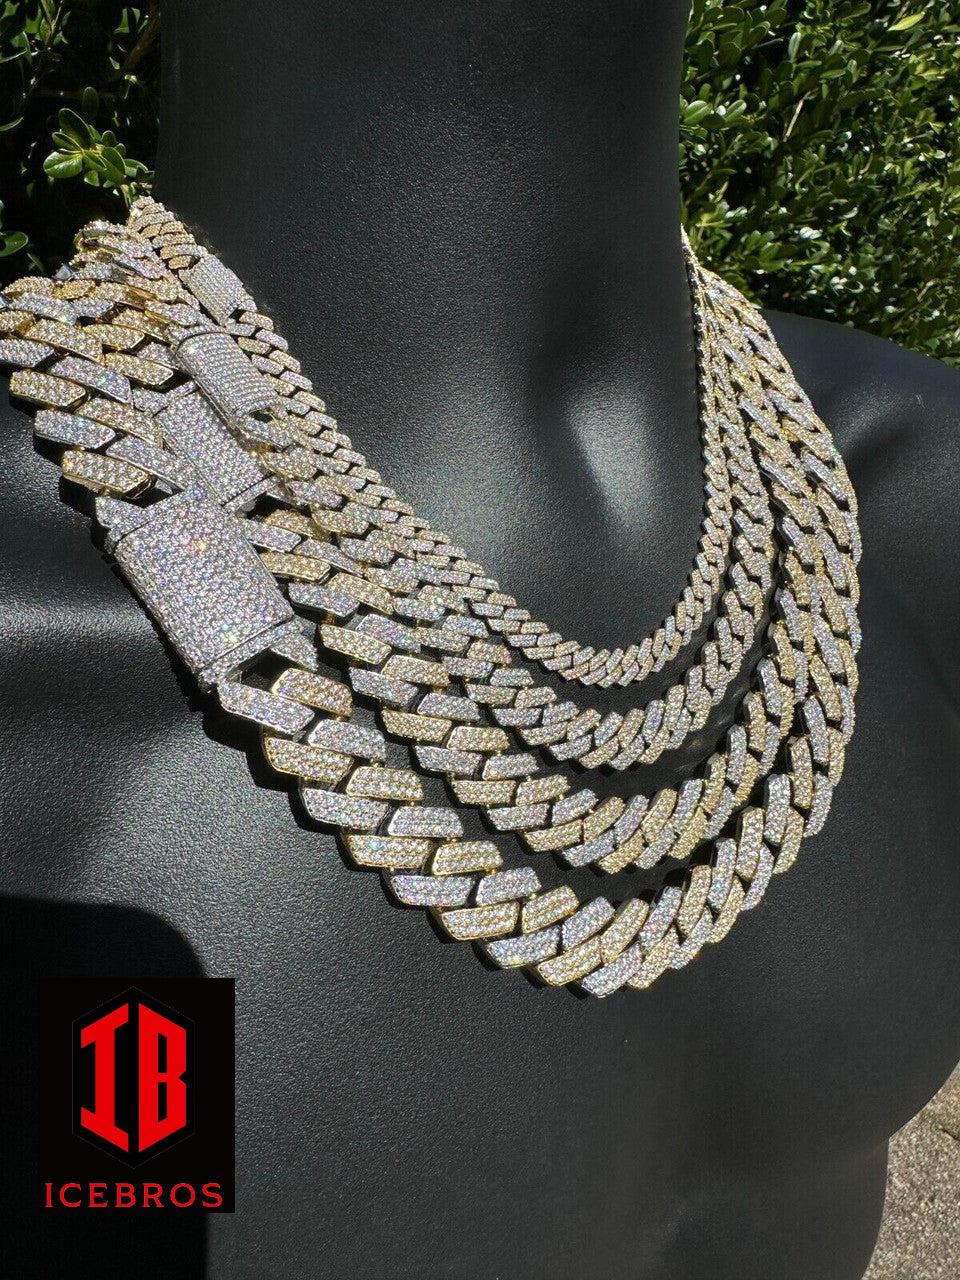 White & Rose Gold Iced Prong Miami Cuban Link Chain Two Tone VVS Moissanite 925 Sterling Silver Necklace